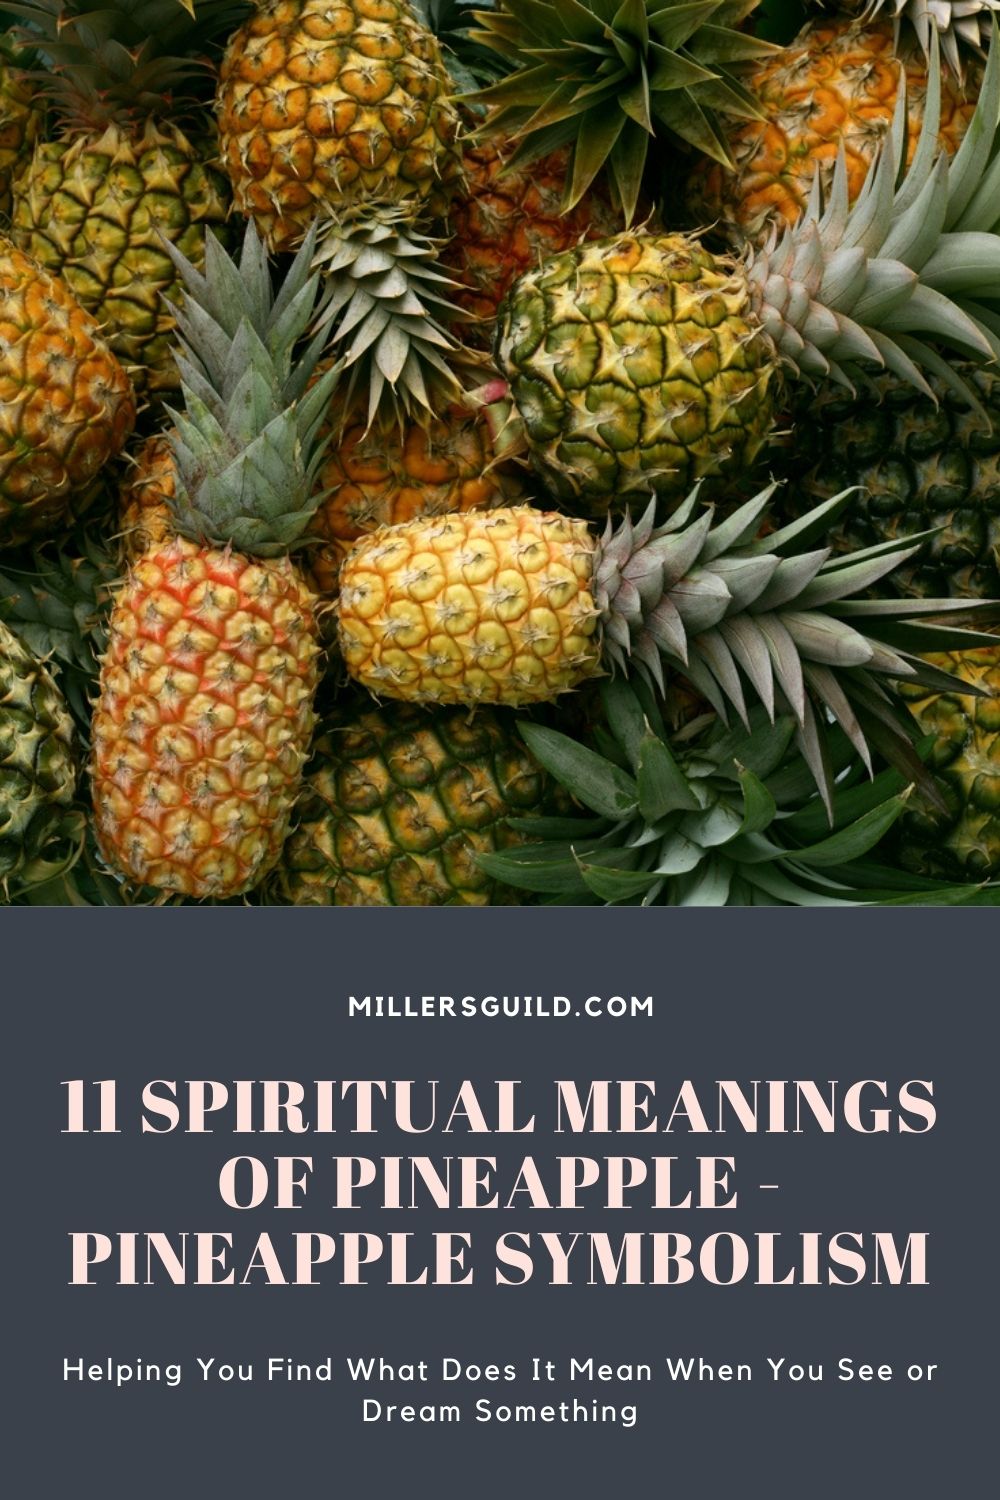 11 Spiritual Meanings of Pineapple - Pineapple Symbolism 2